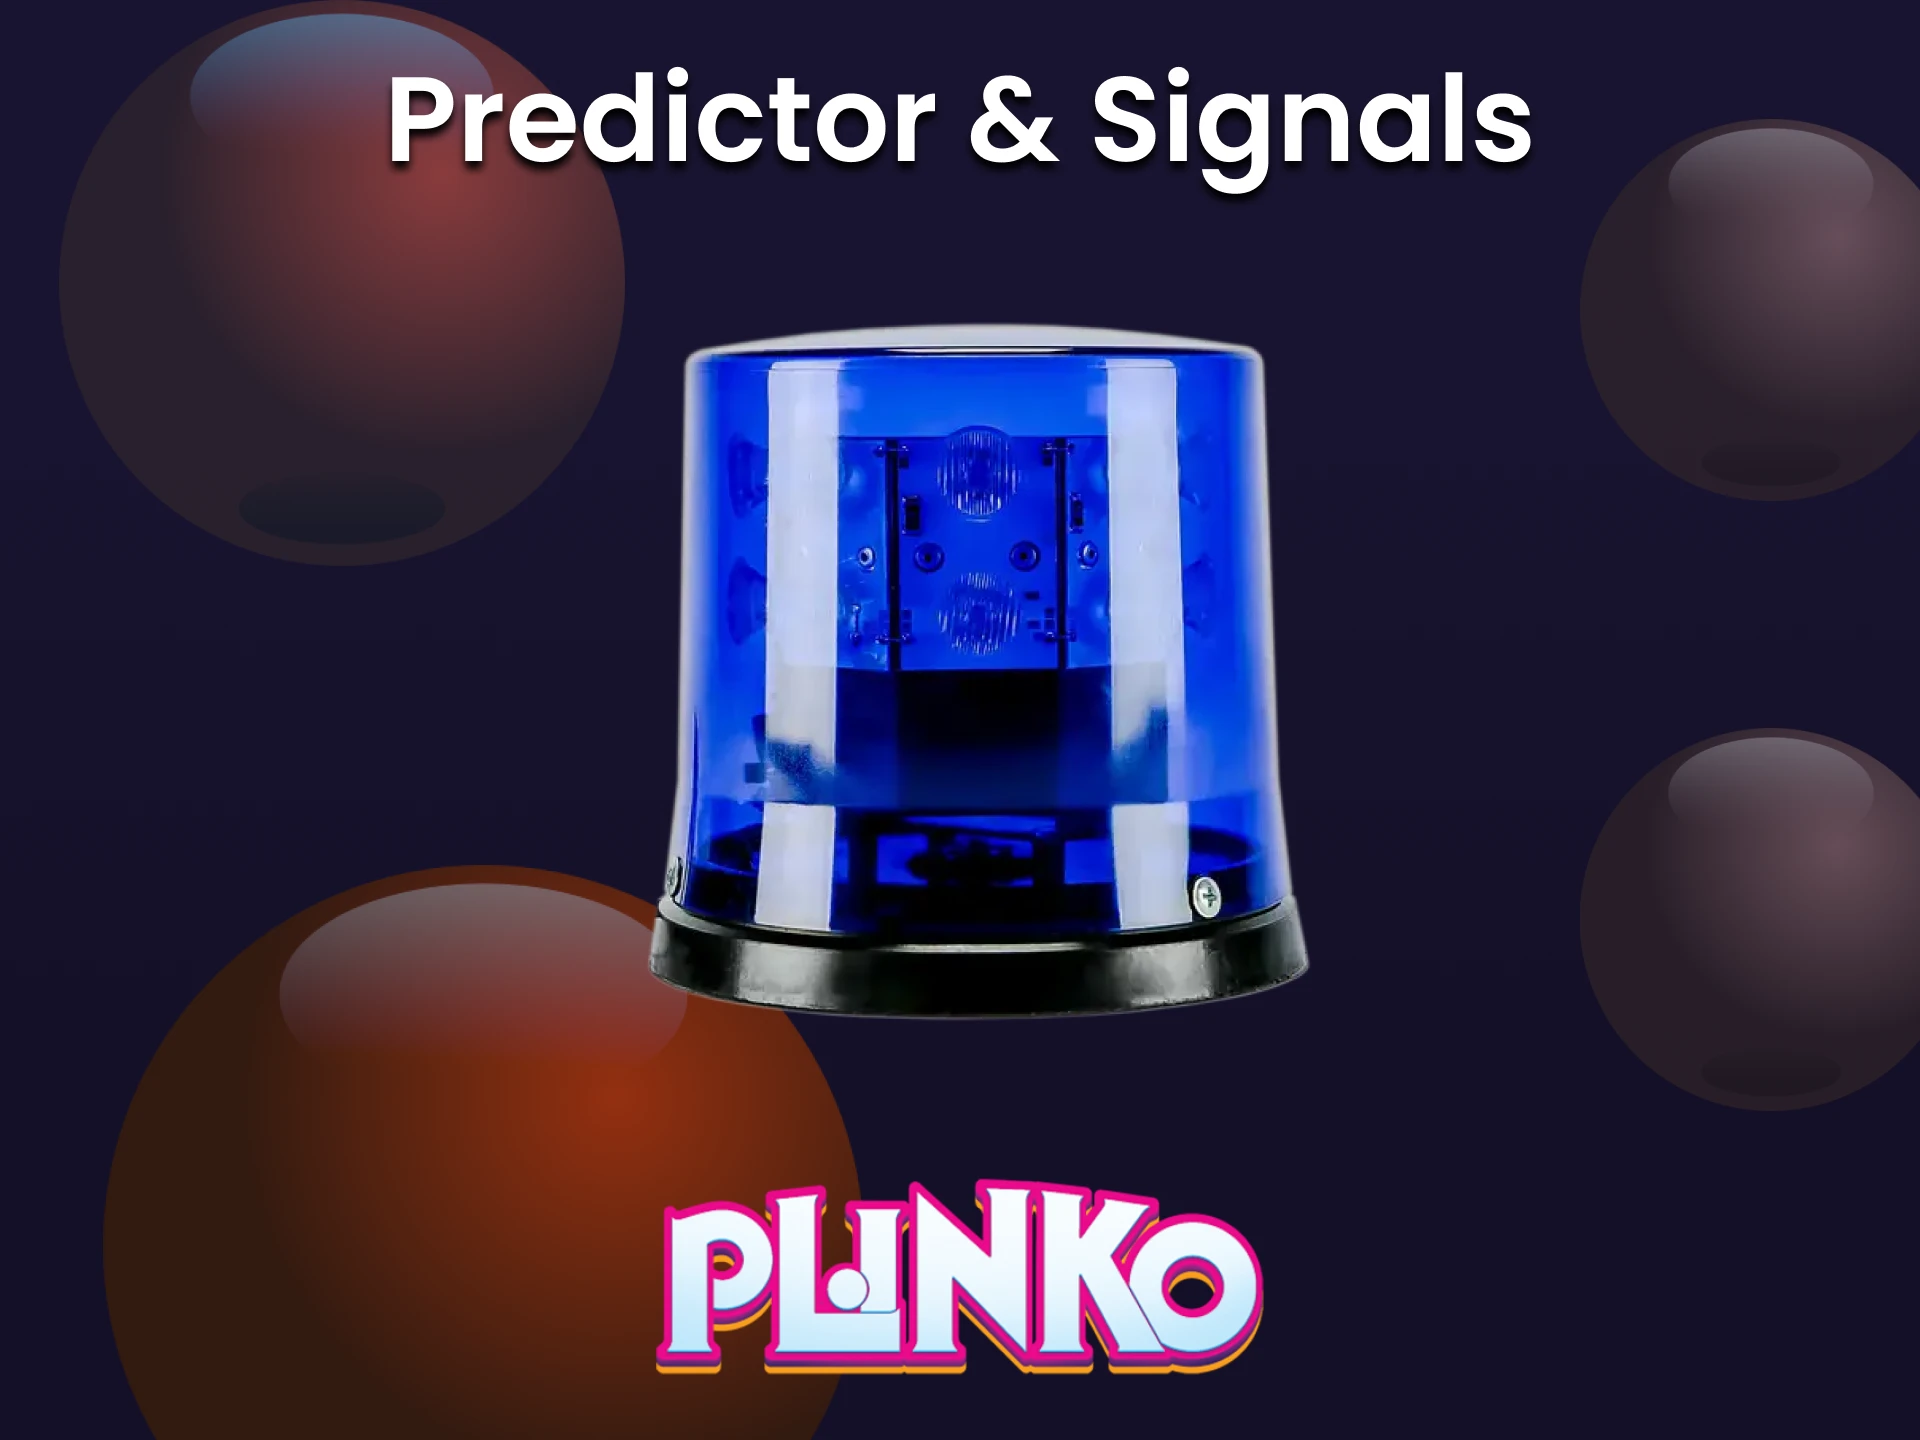 We will talk about third-party software for playing Plinko.